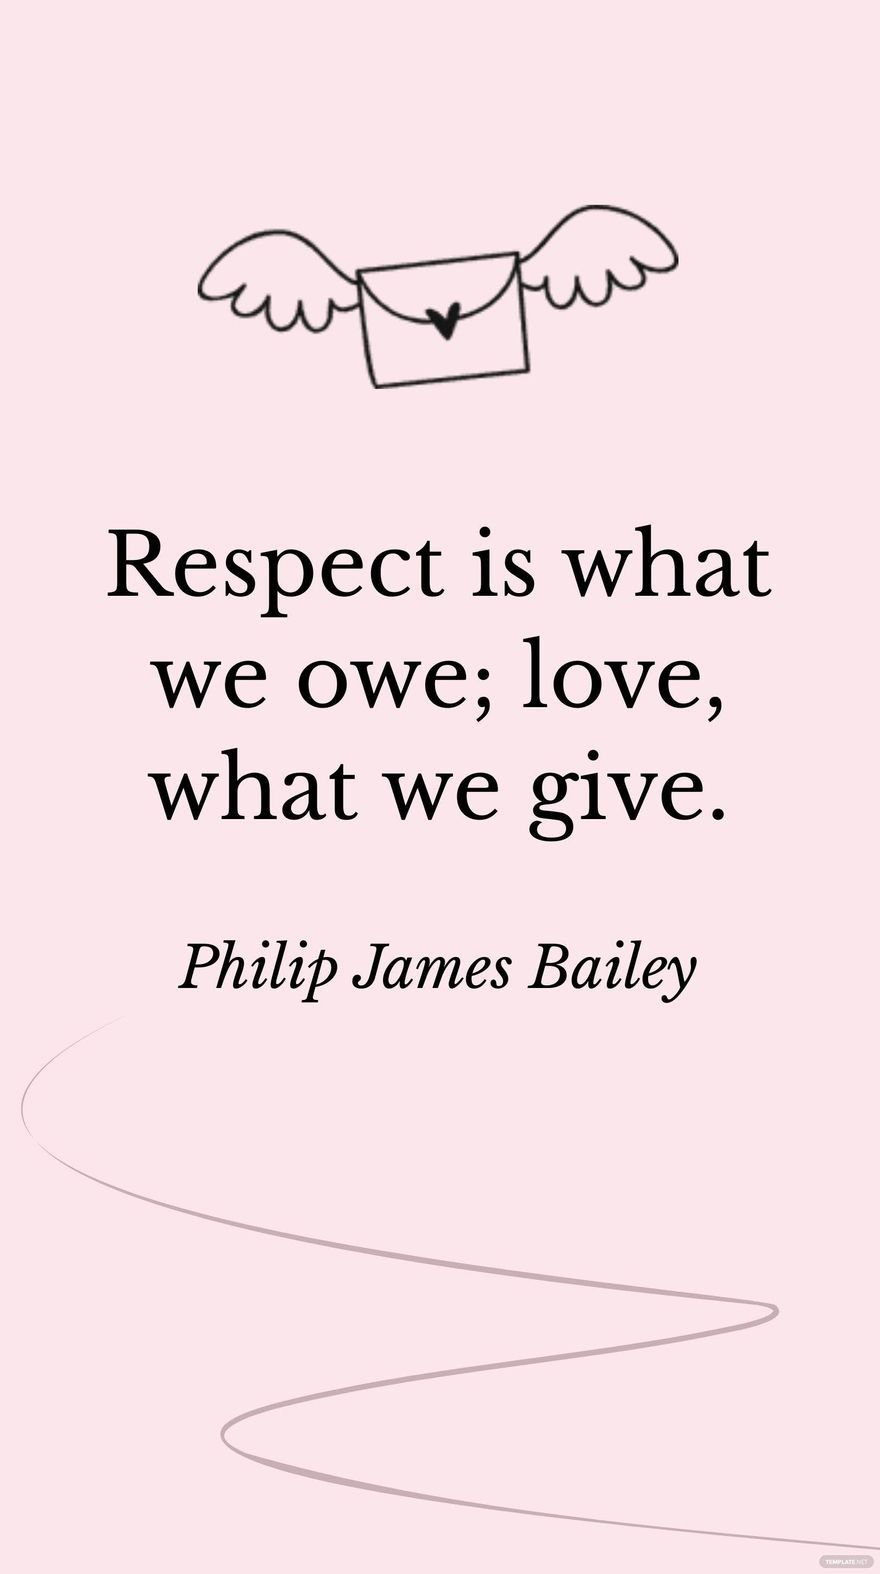 Philip James Bailey - Respect is what we owe; love, what we give.